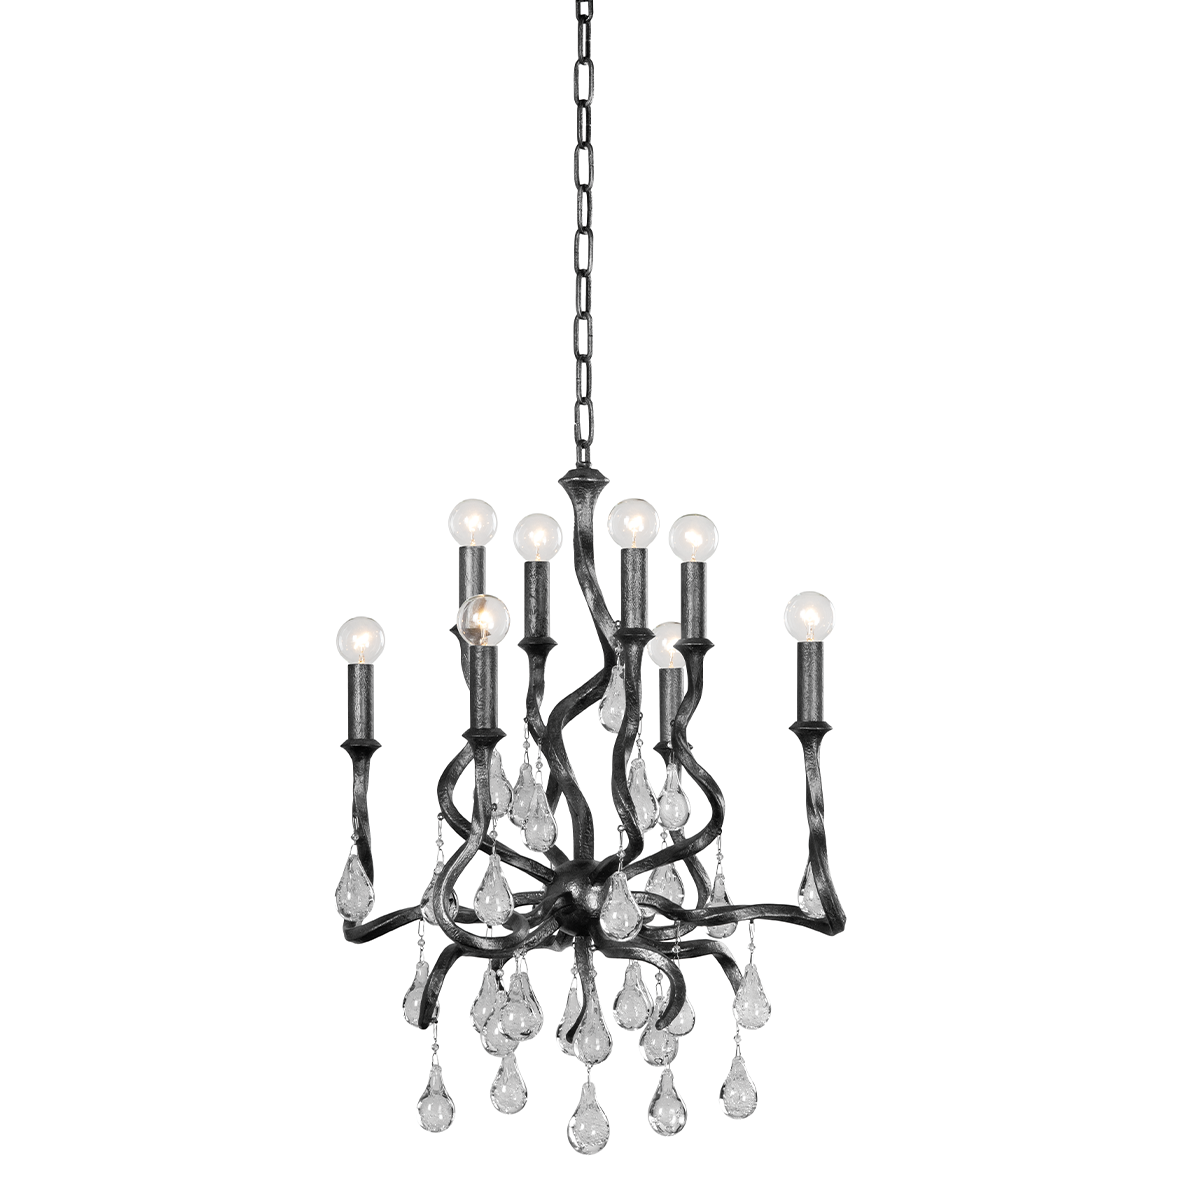 Steel Swirling Arms with Craquelle Crystal Drops Chandelier